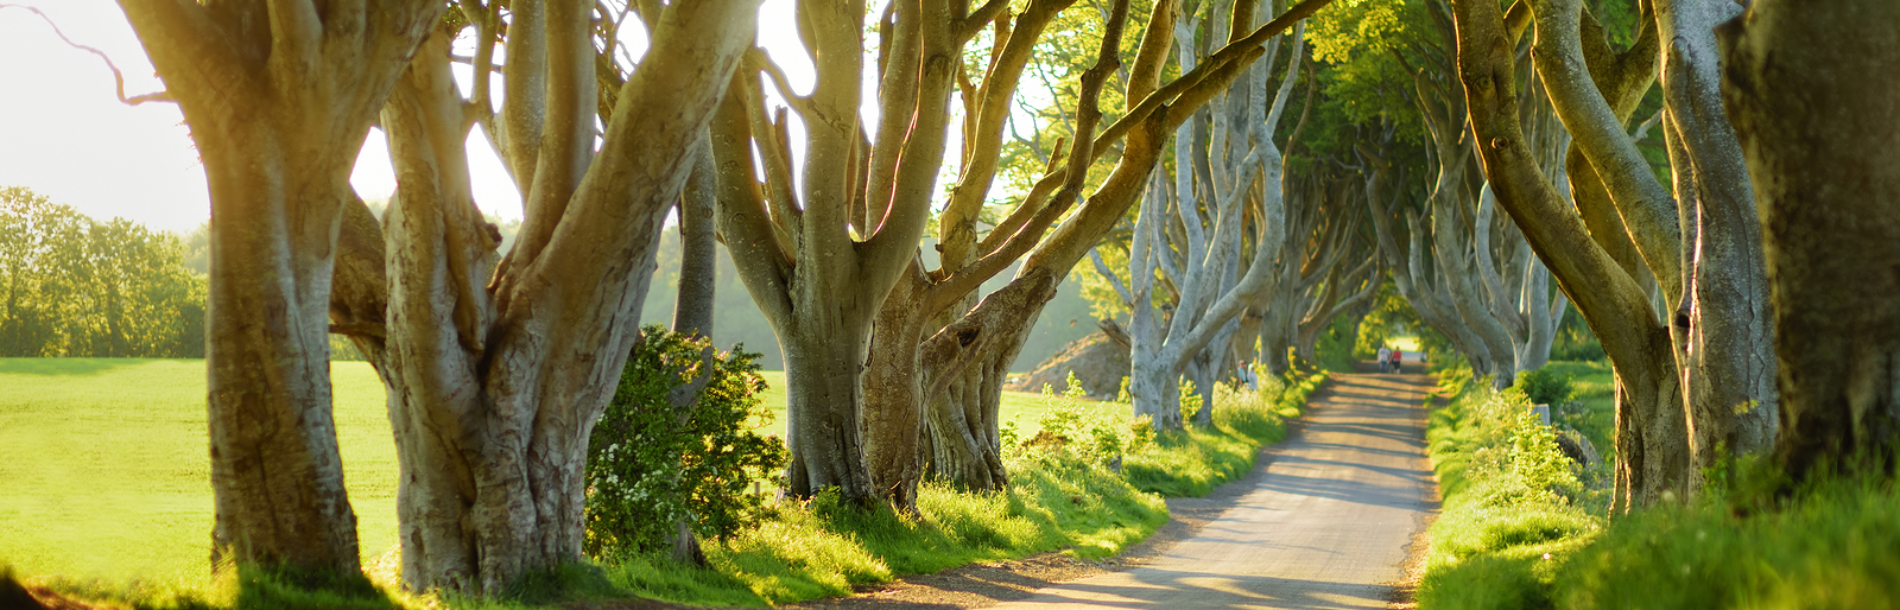 The Dark Hedges, An Avenue Of Beech Trees Along Bregagh Road In